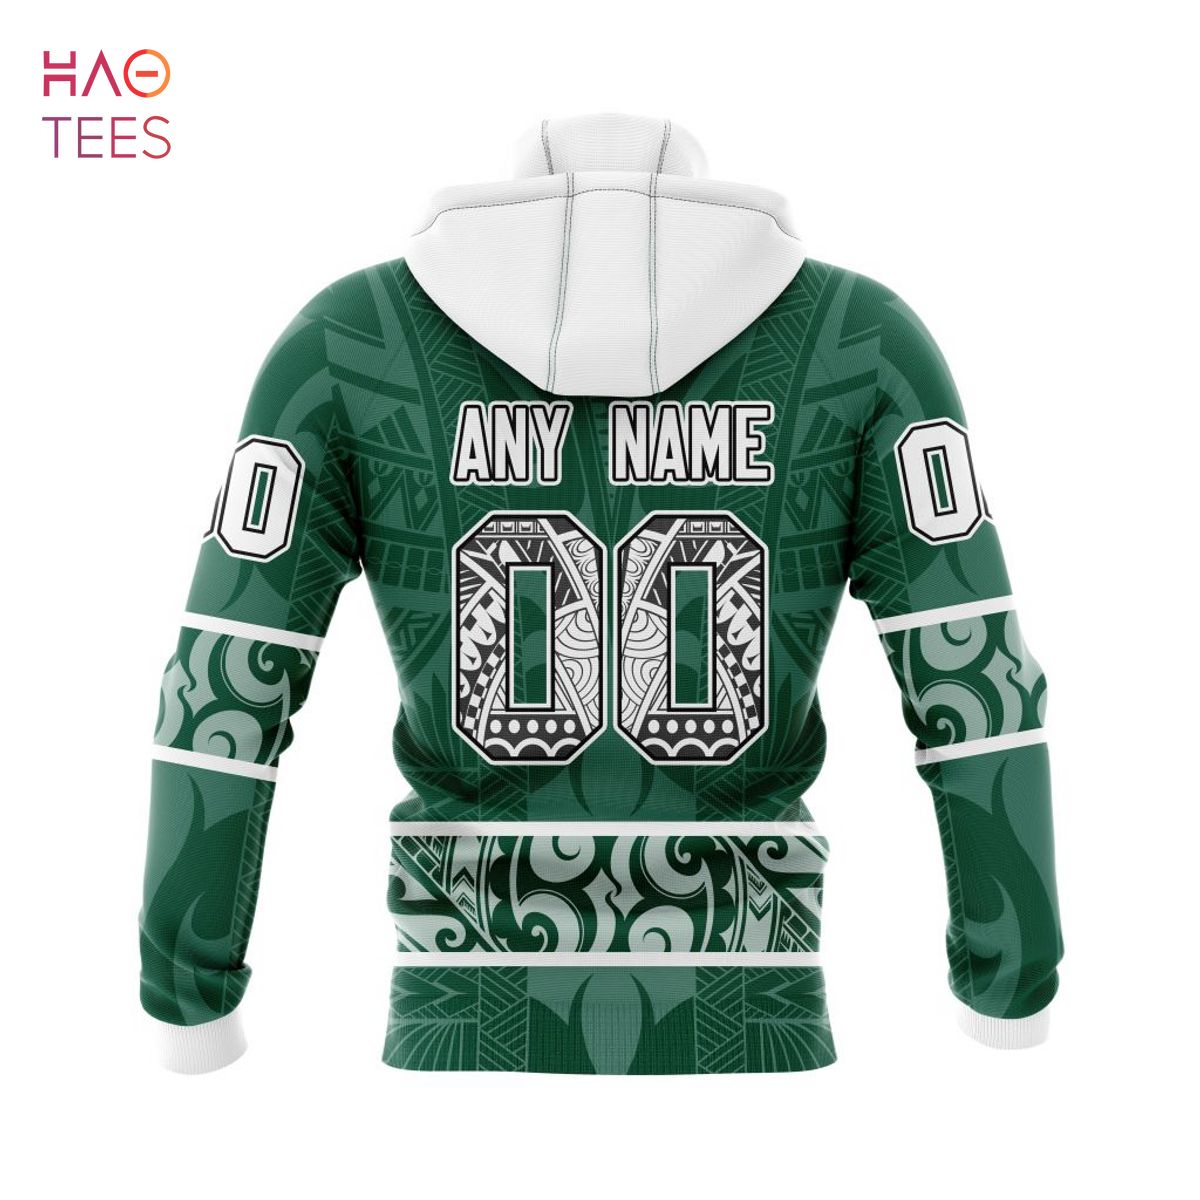 BEST NFL New York Jets, Specialized Native With Samoa Culture 3D Hoodie